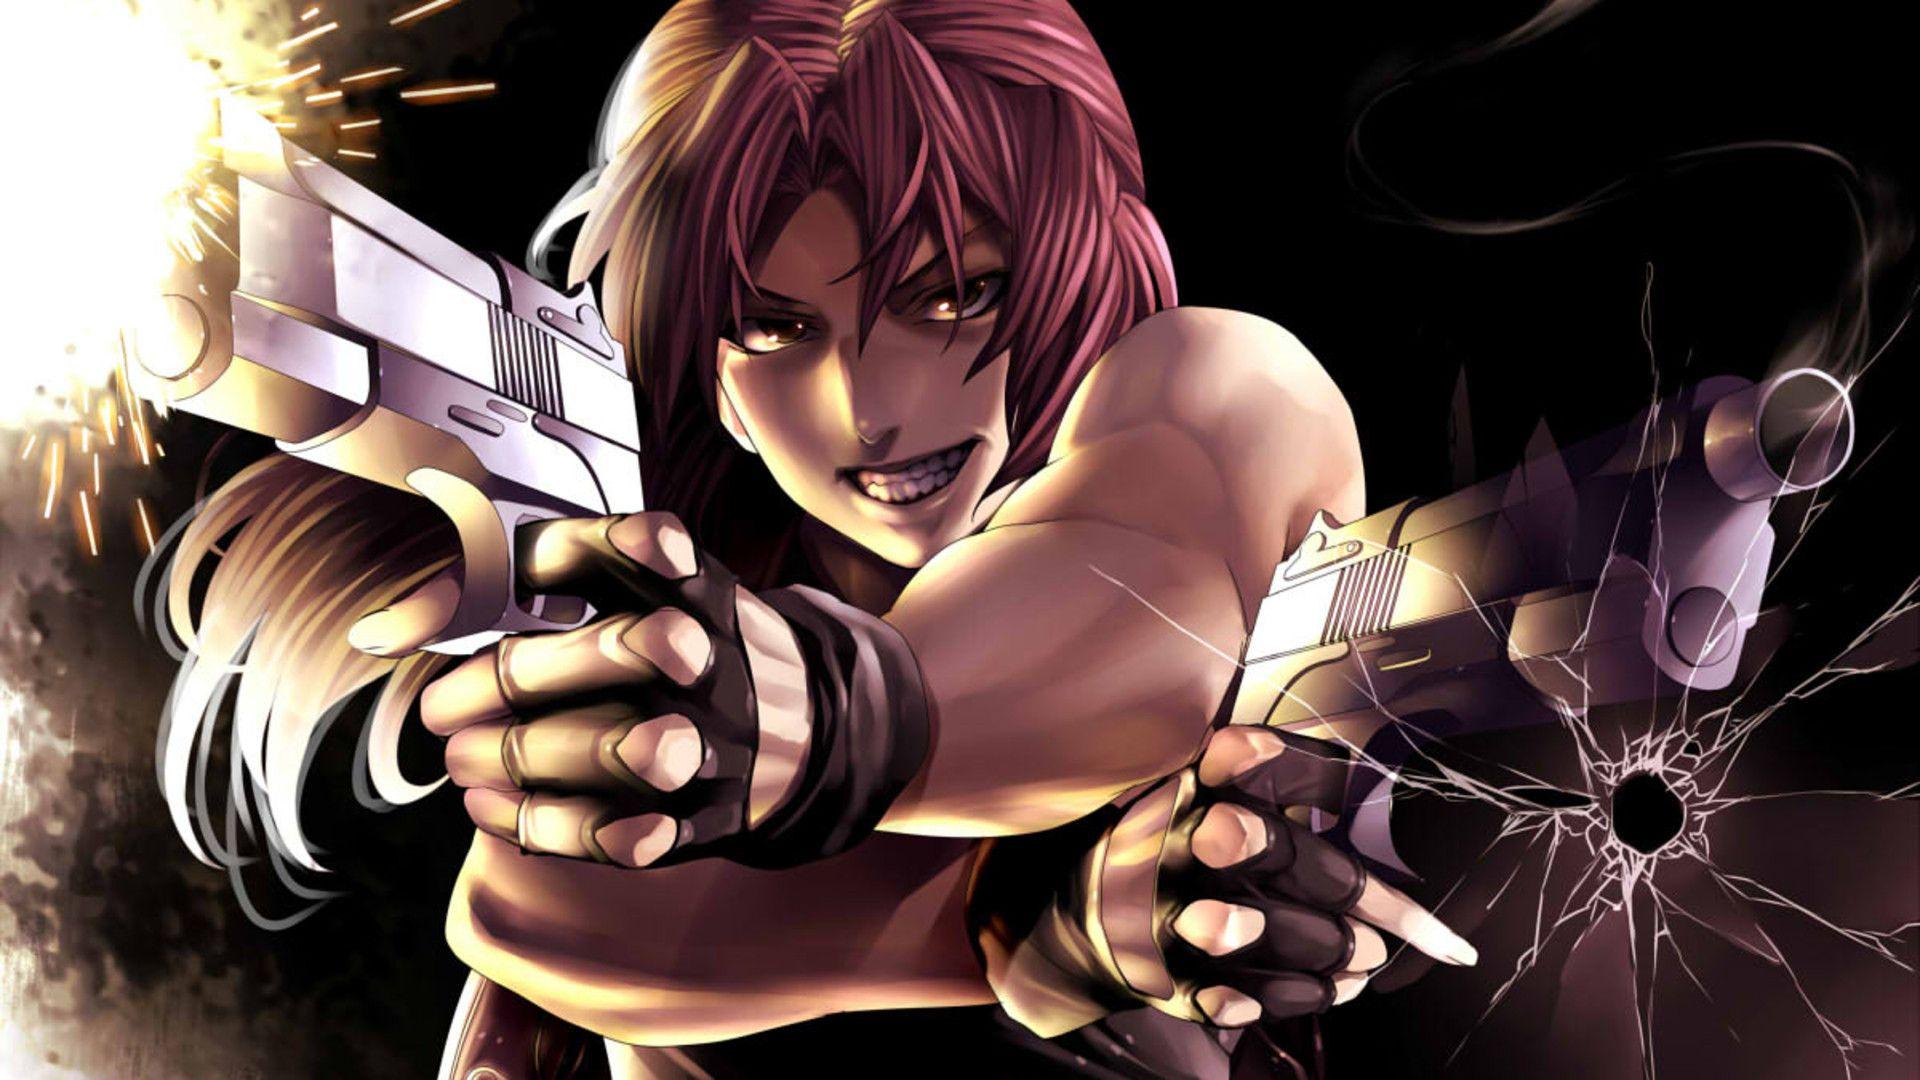 Undefined Revy Black Lagoon Adorable Wallpaper Wp64010449